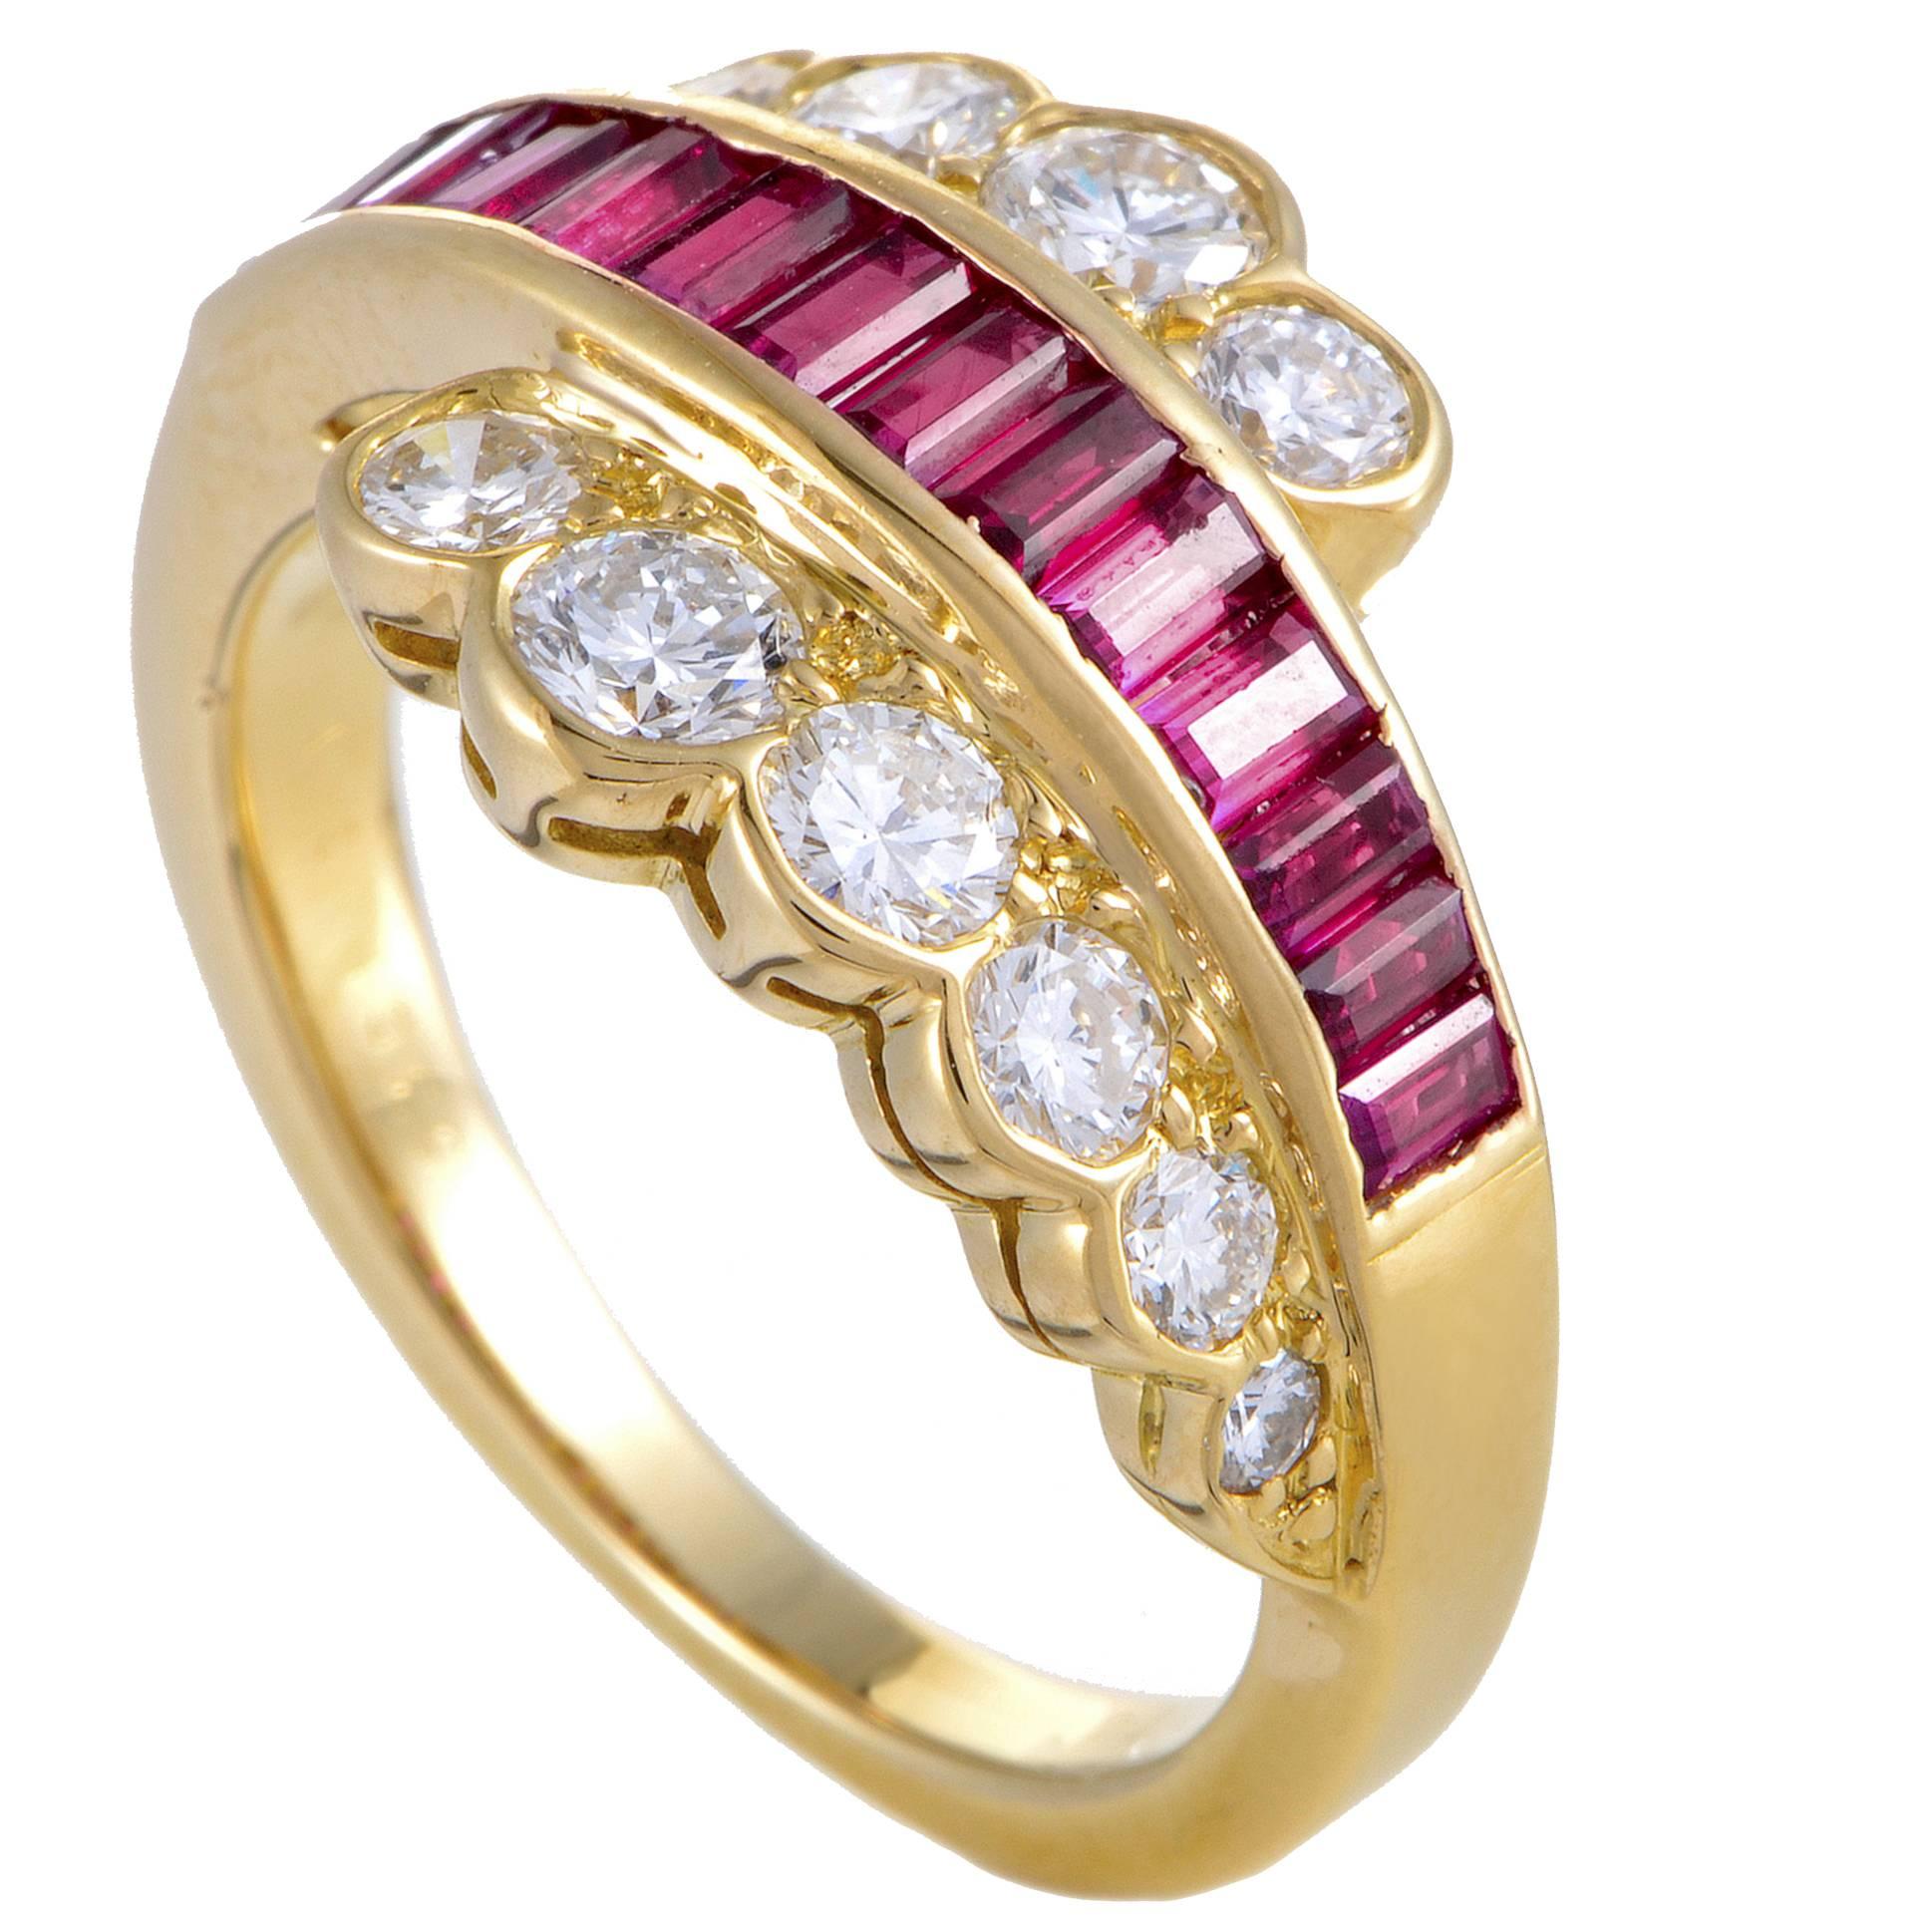 Van Cleef & Arpels Yellow Gold Diamond and Invisible Set Ruby Ring